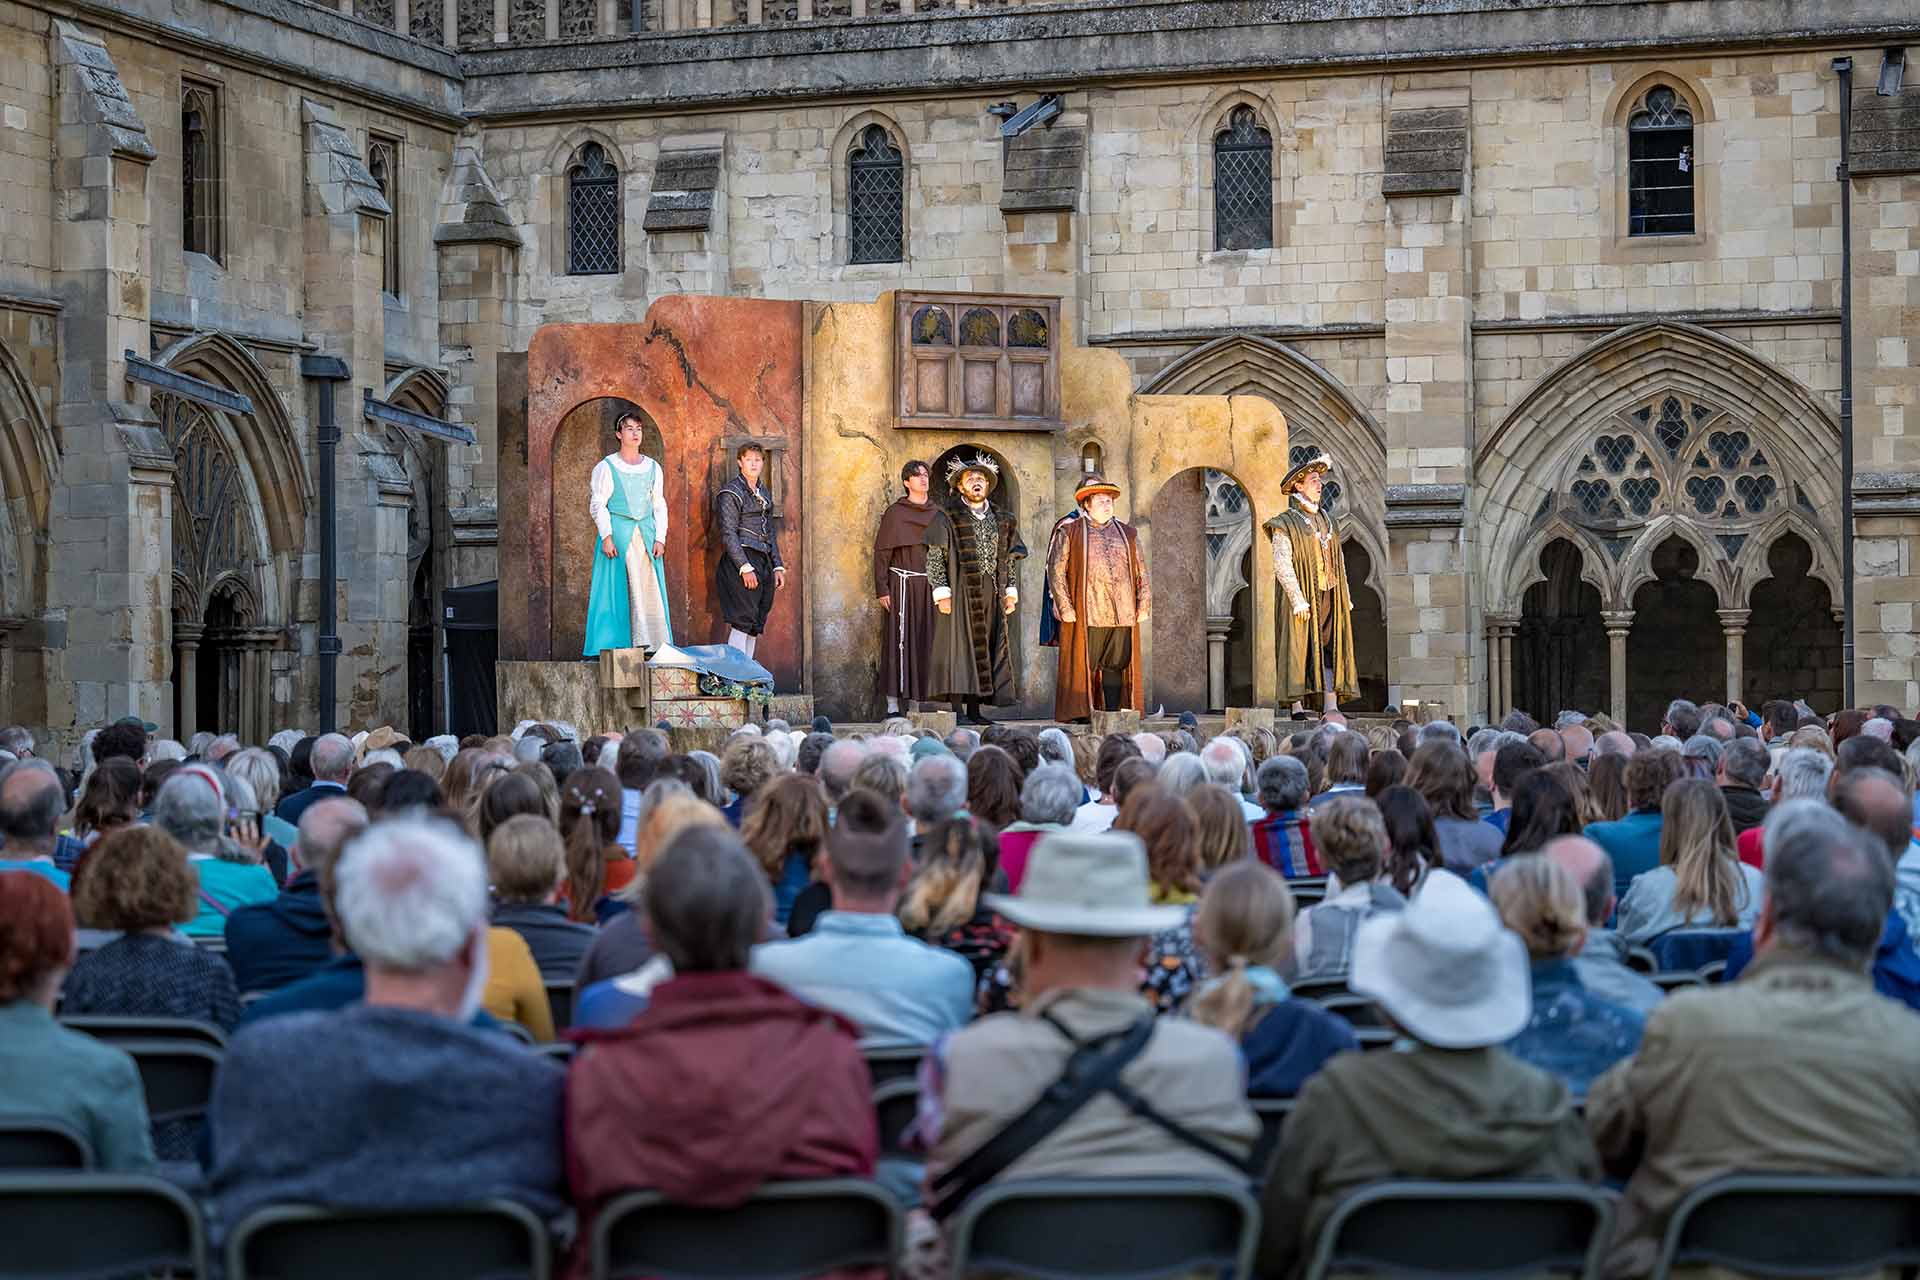 The Lord Chamberlain's Men perform  on stage with a large crowd 